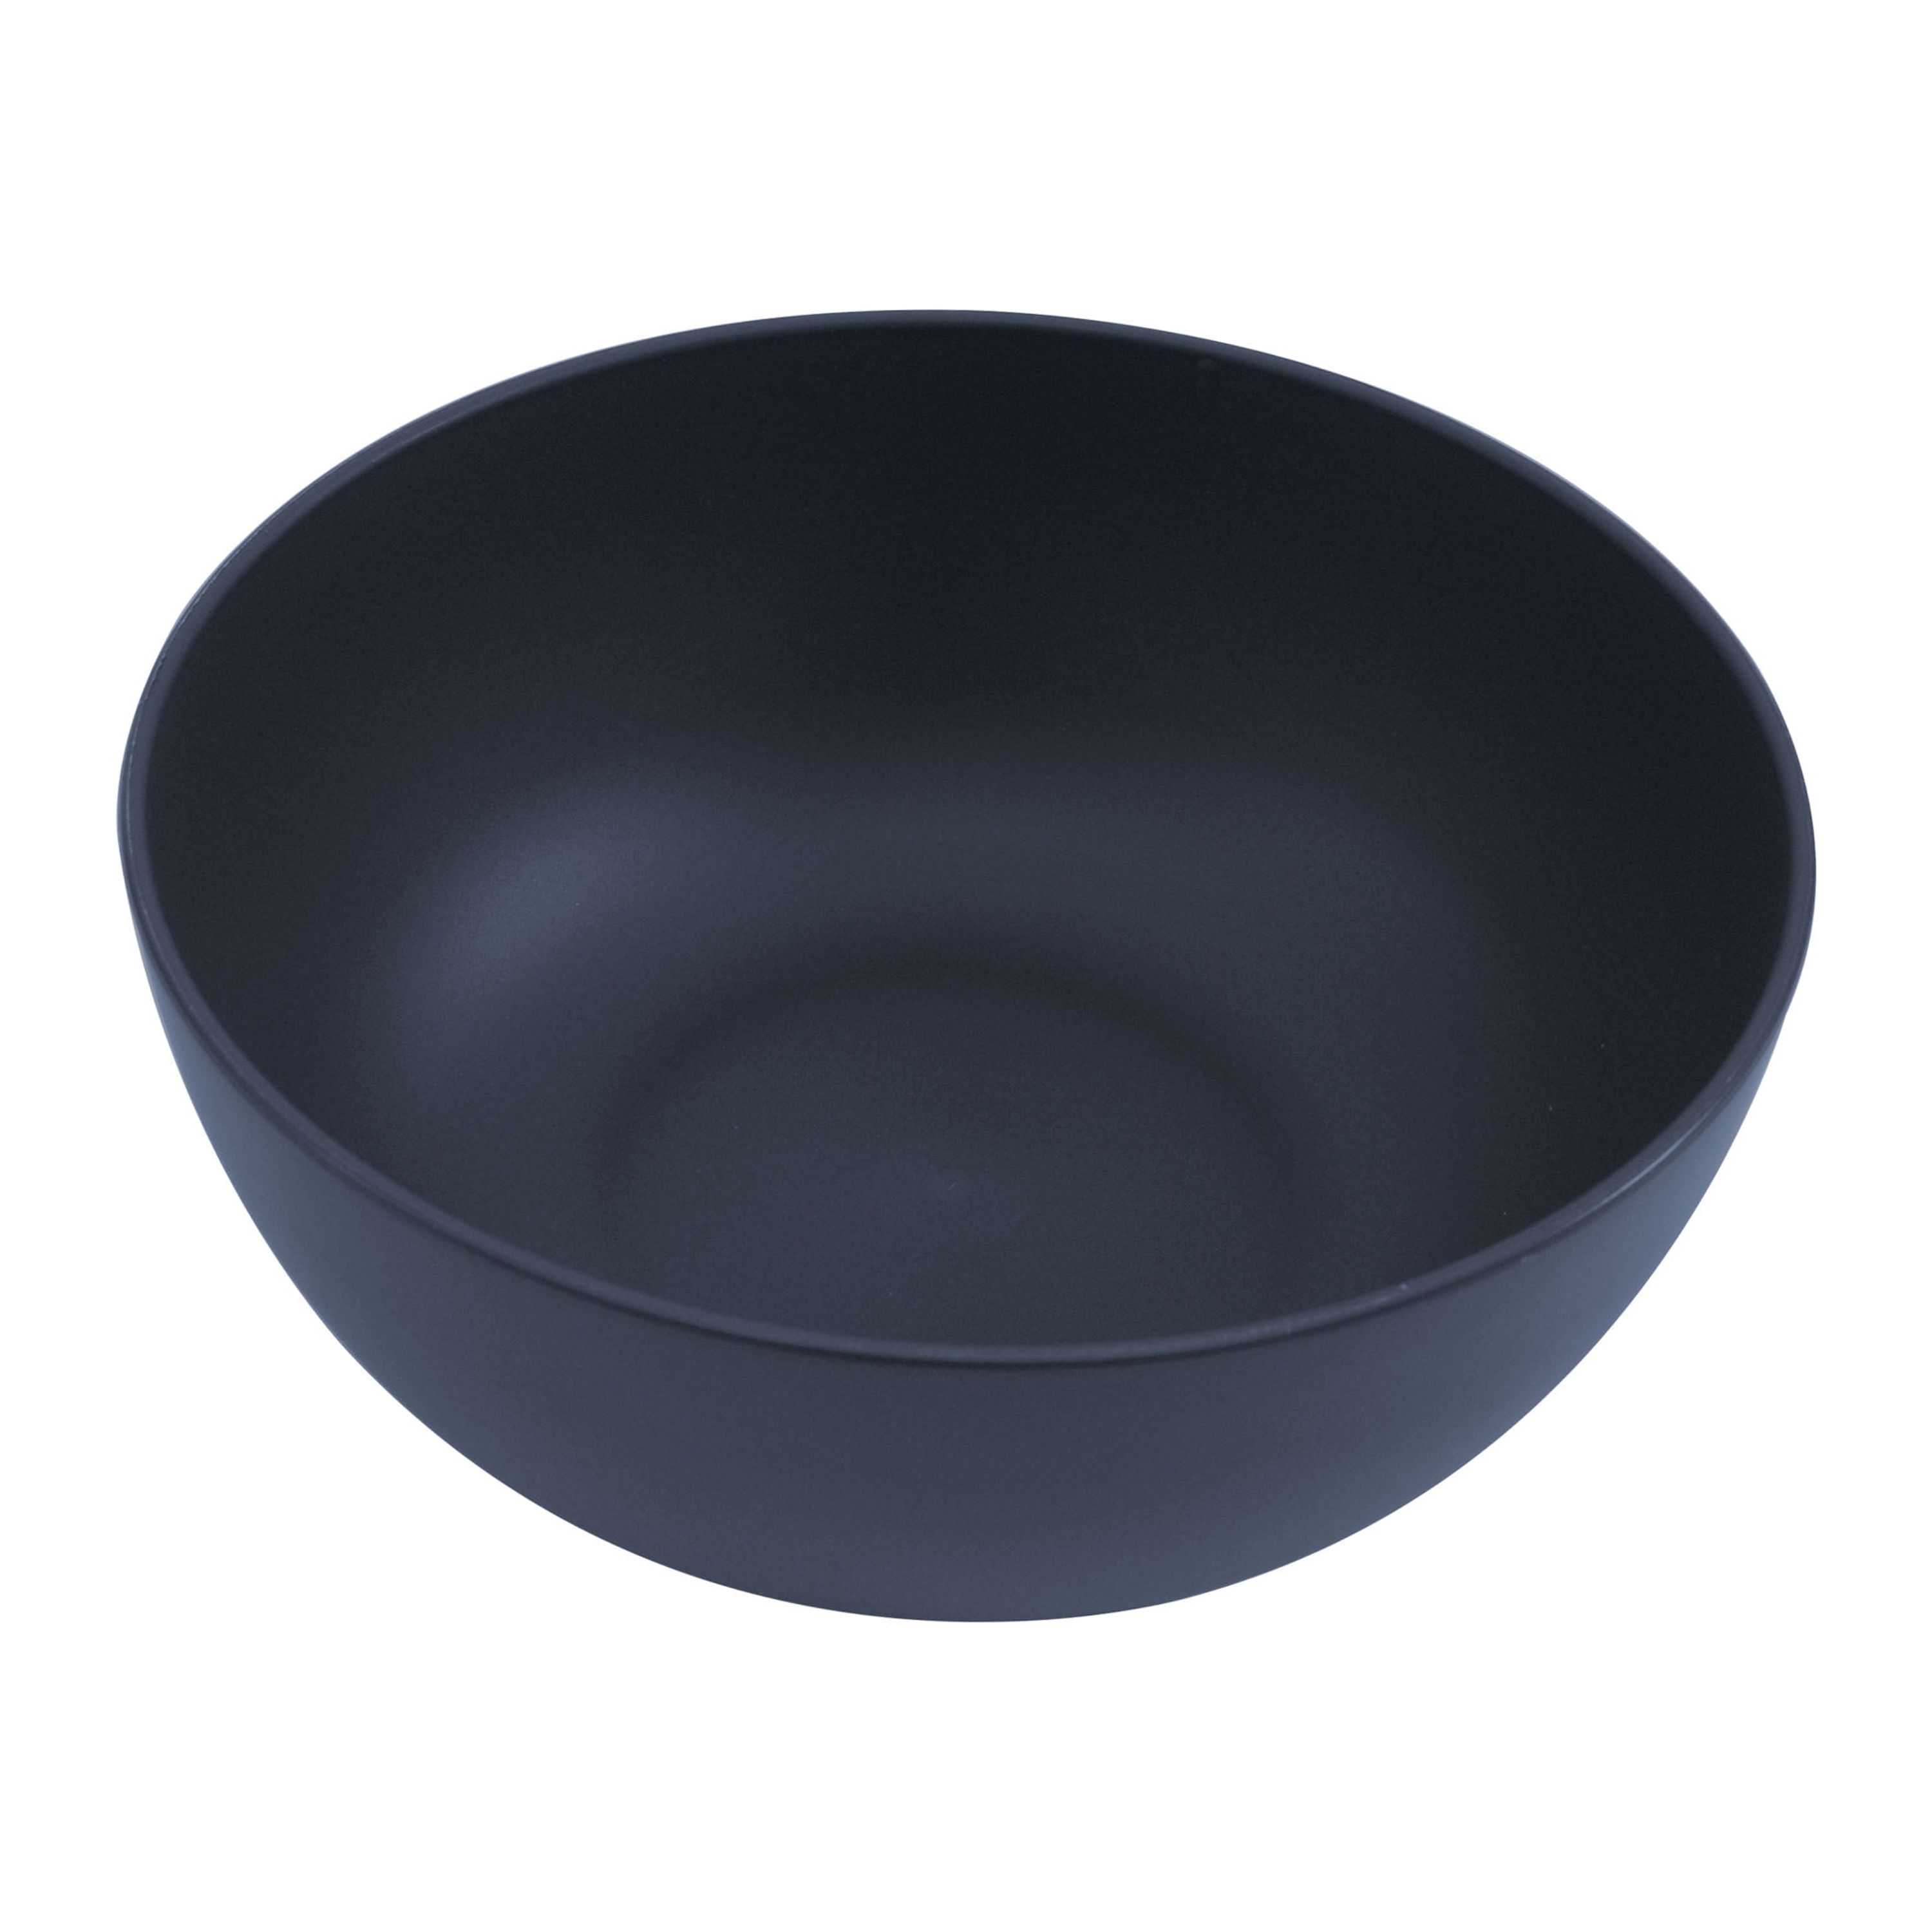 Mainstays - Dark Blue Round Plastic Cereal Bowl, 38-Ounce - image 4 of 4